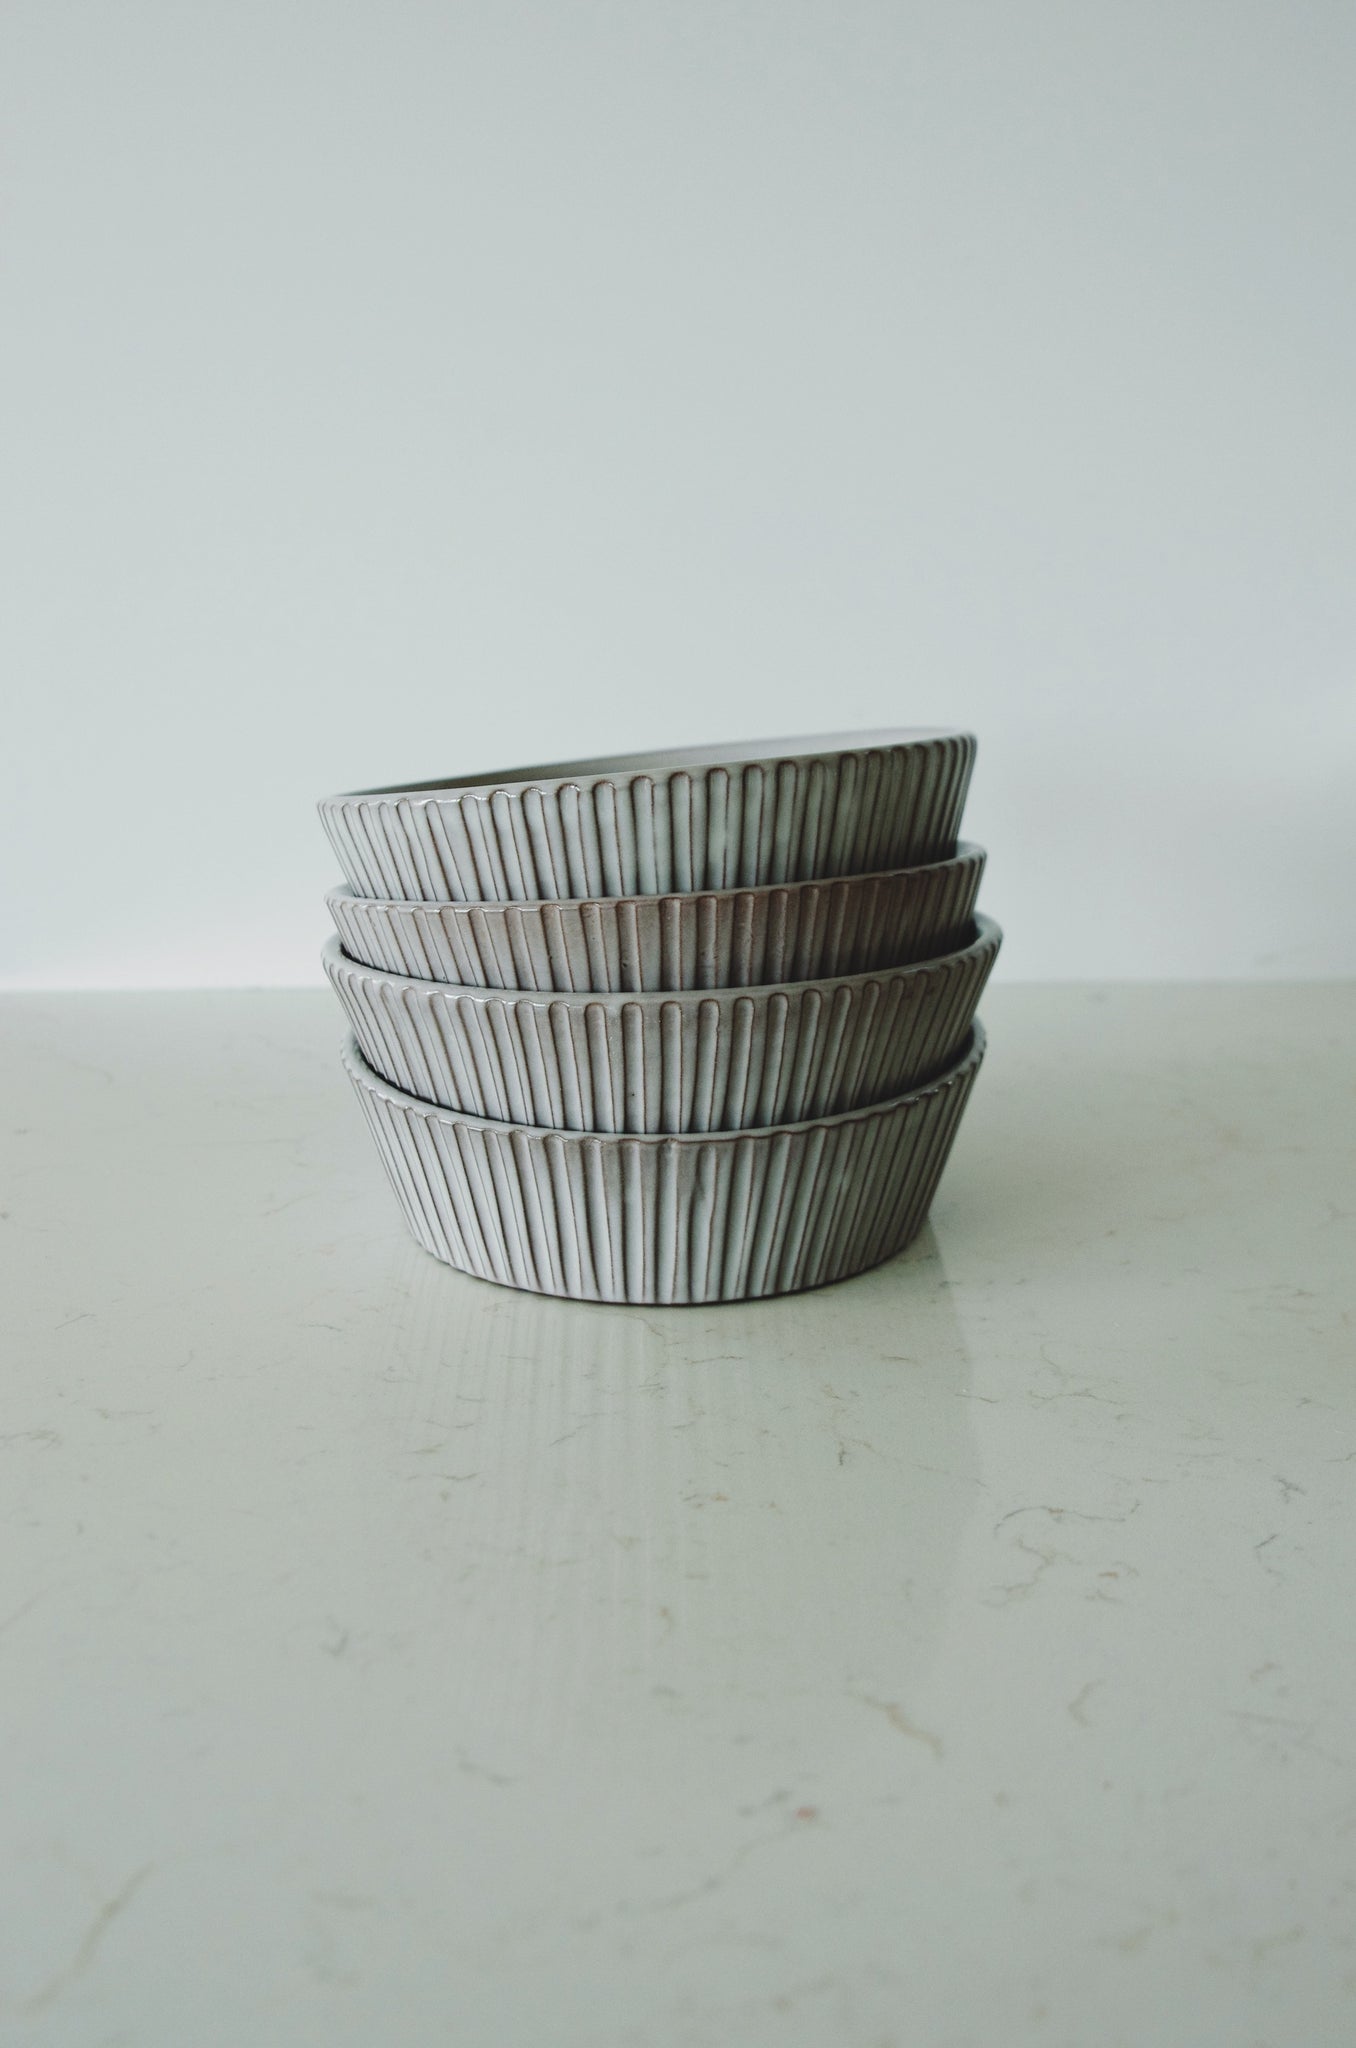 A stack of grey ribbed ceramic bowls on a marble countertop with a plain white background.